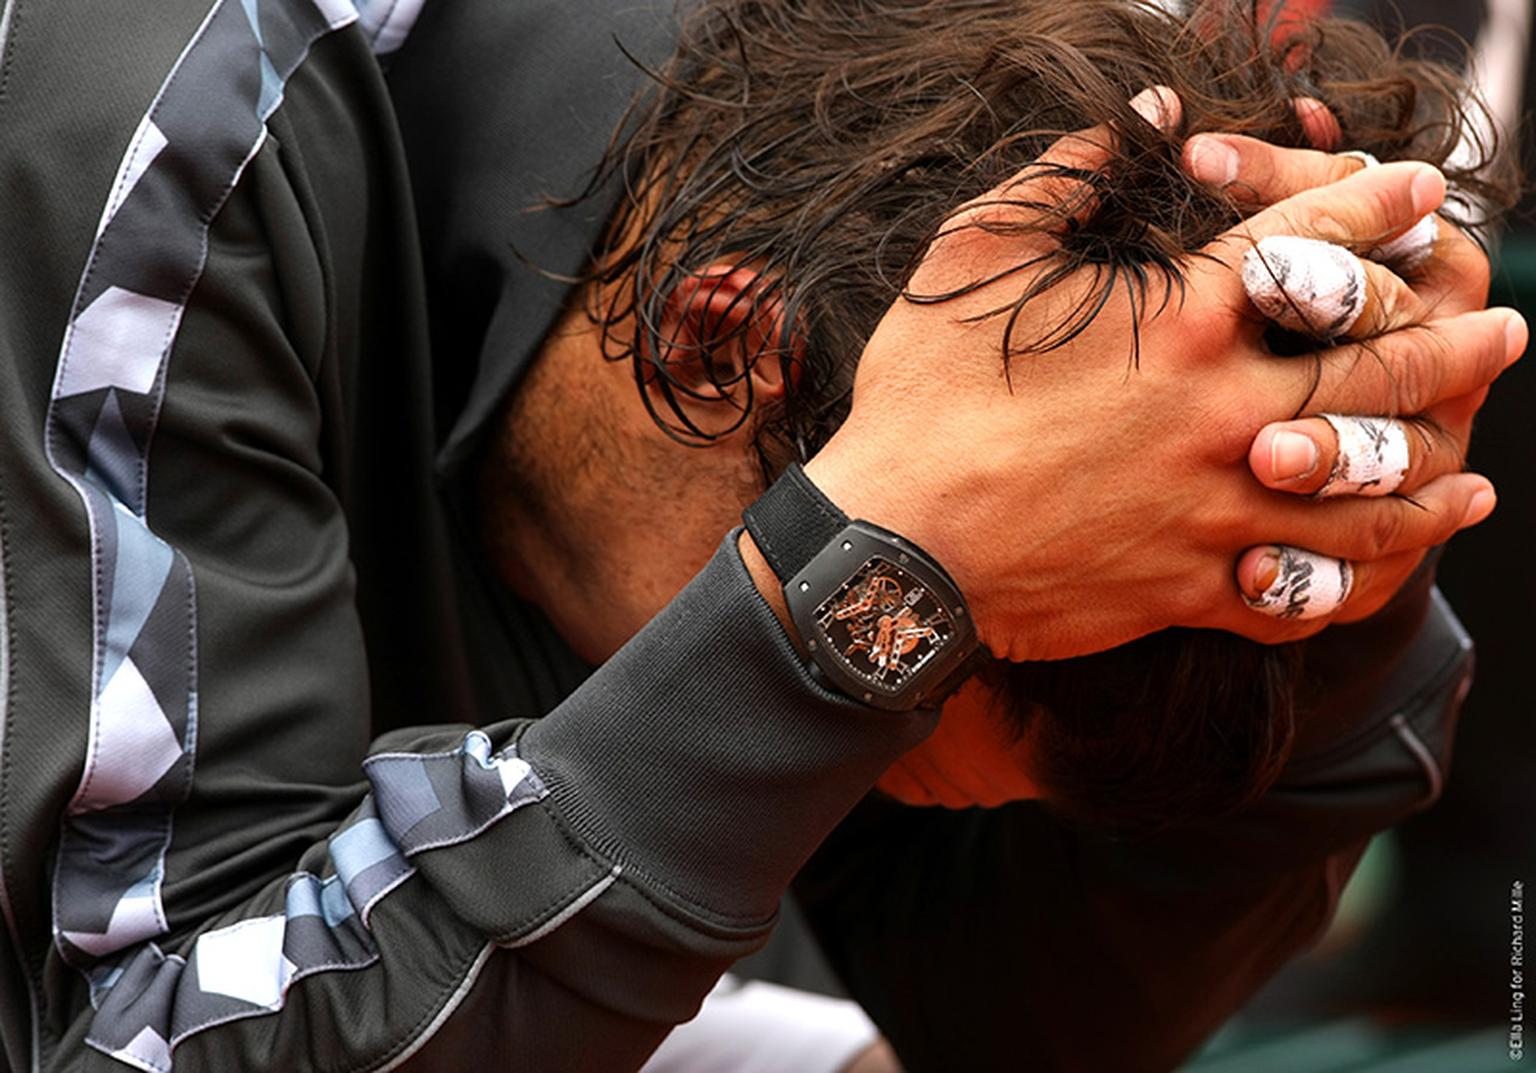 Rafael Nadal concentrates at the French Open